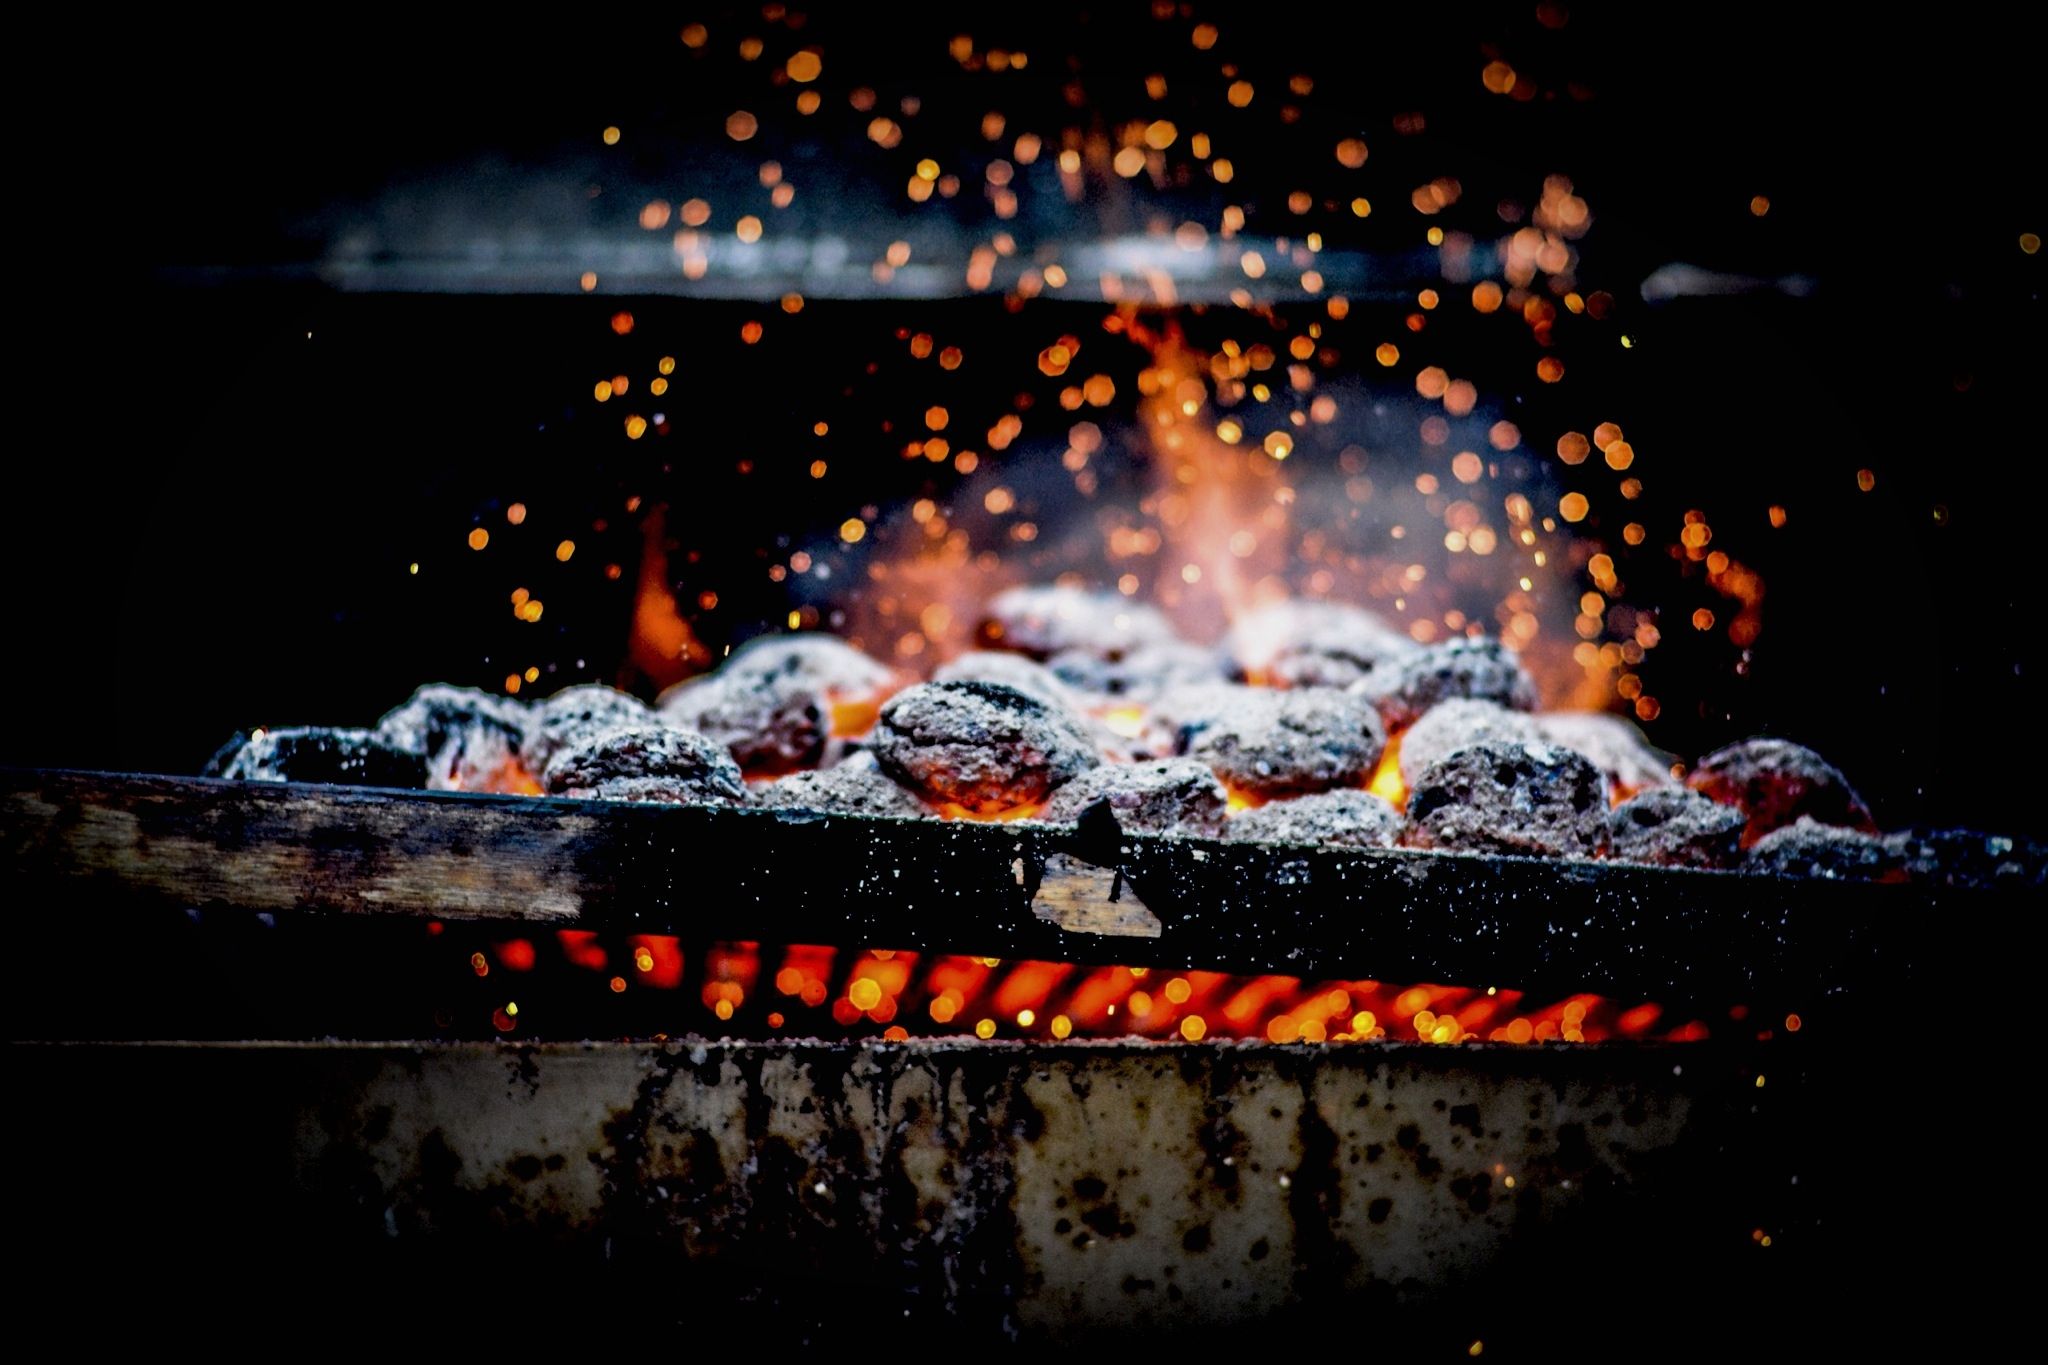 https://hips.hearstapps.com/hmg-prod/images/close-up-of-burning-coal-on-metal-grill-royalty-free-image-1588351868.jpg